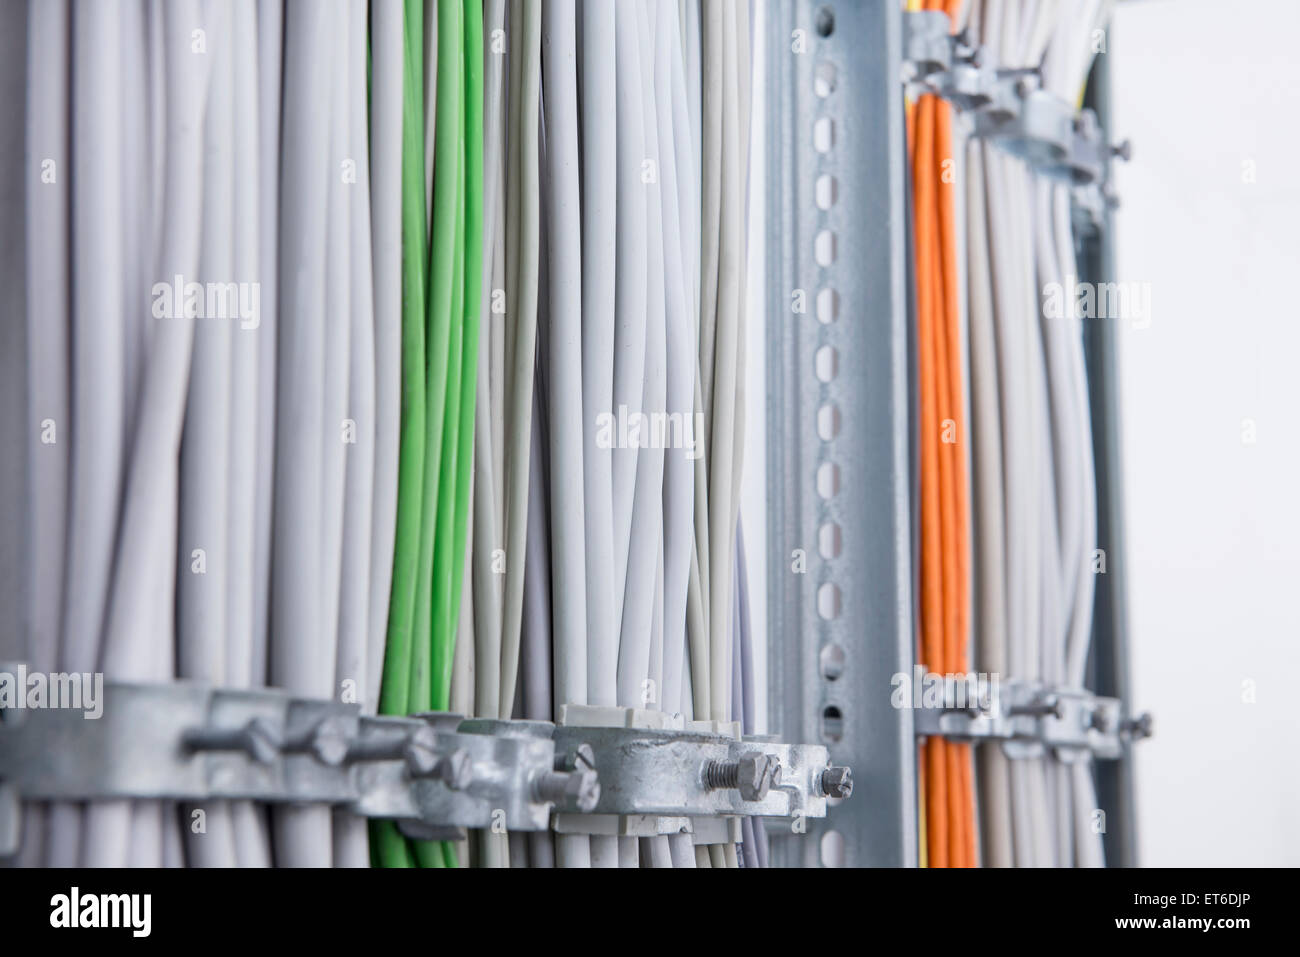 Cable clamps mounted on cables, Munich, Bavaria, Germany Stock Photo